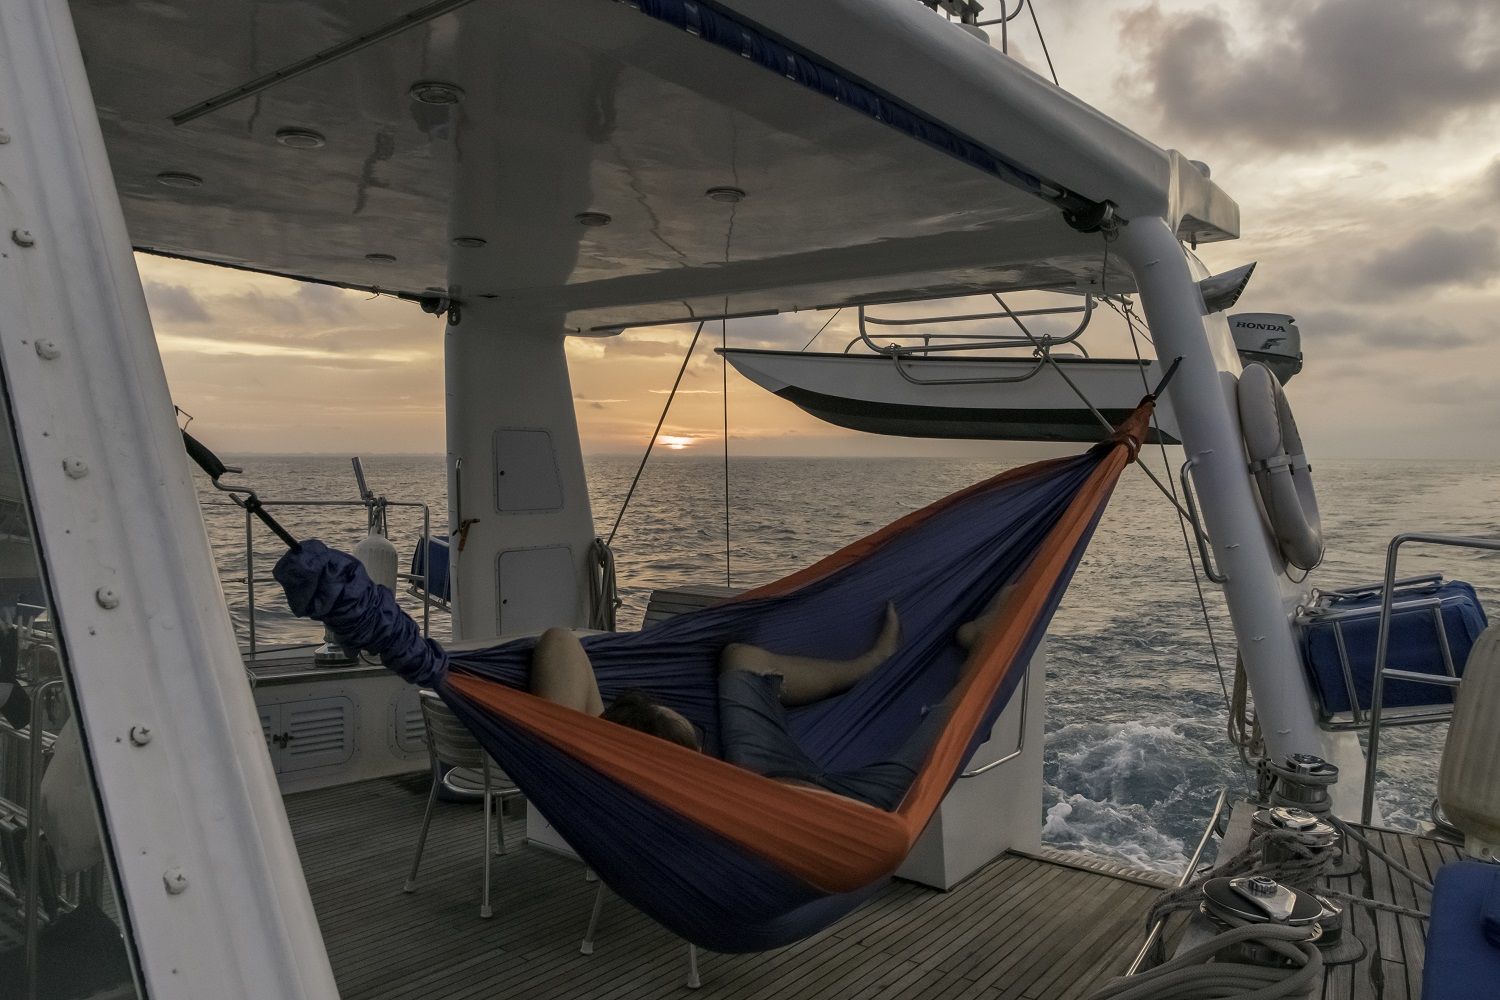 Ticket To The Moon King Size Hammock